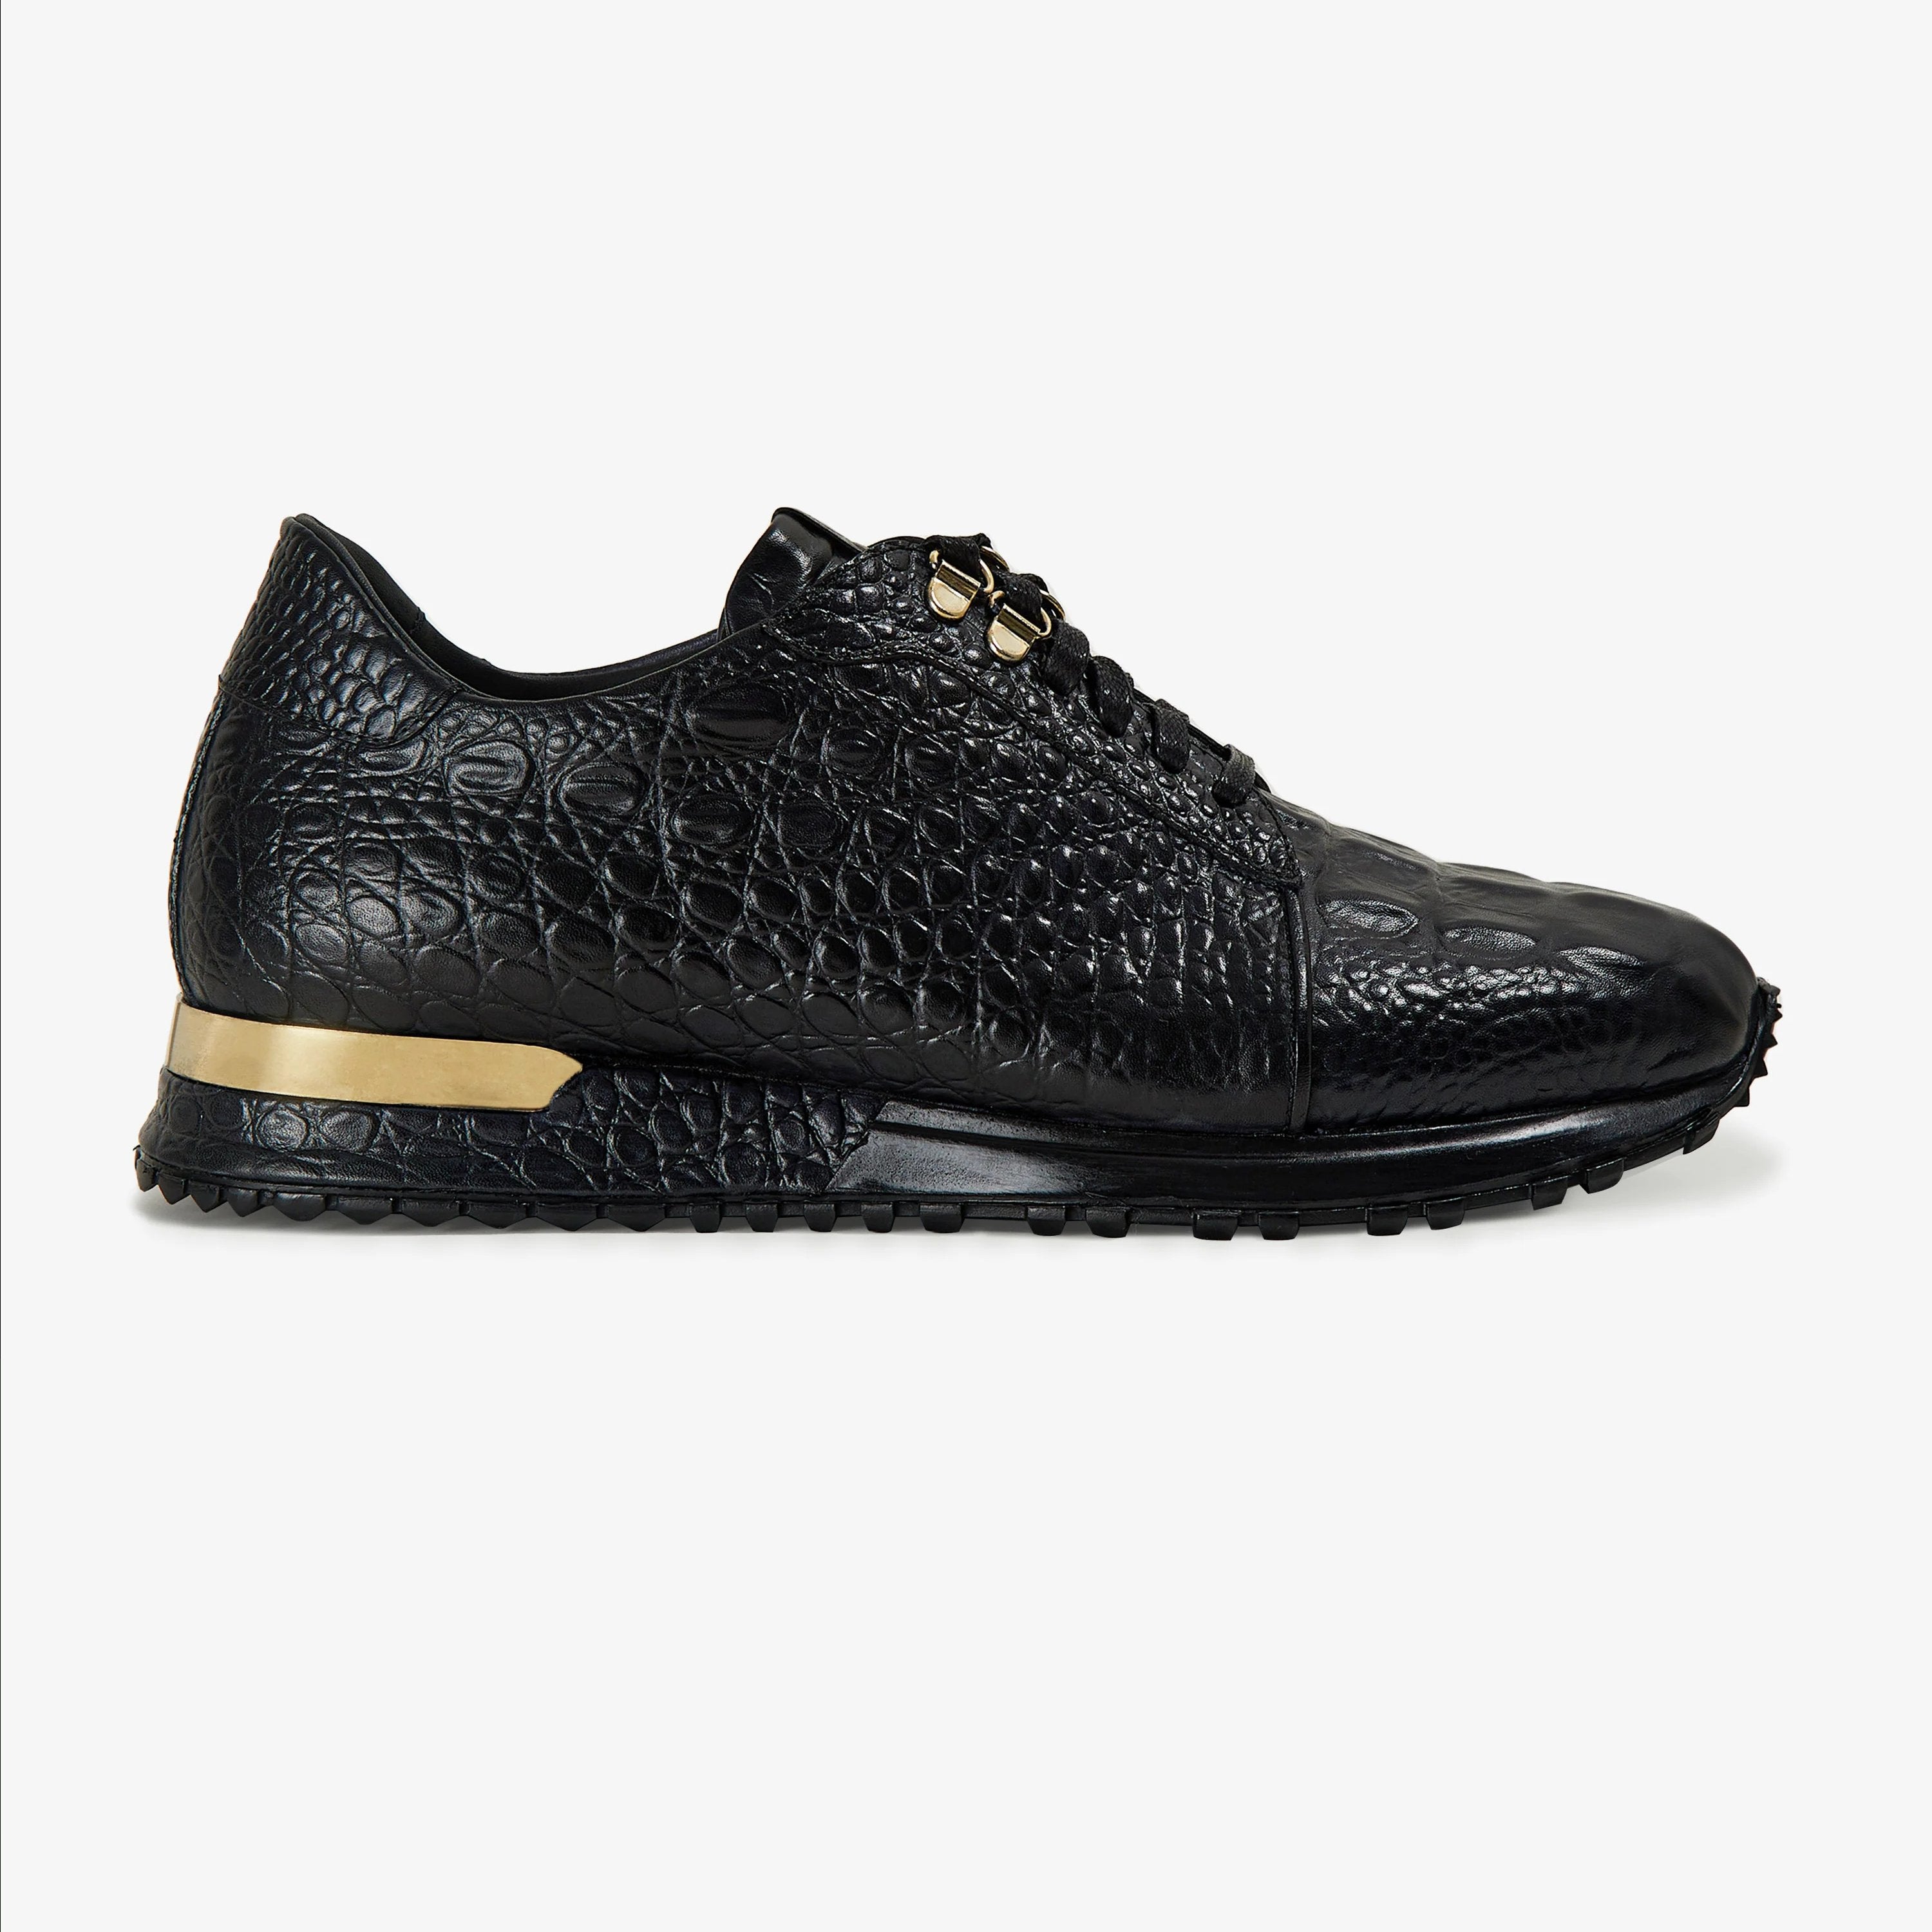 Louis Vuitton Men's Sneakers Clearance, SAVE 40% 